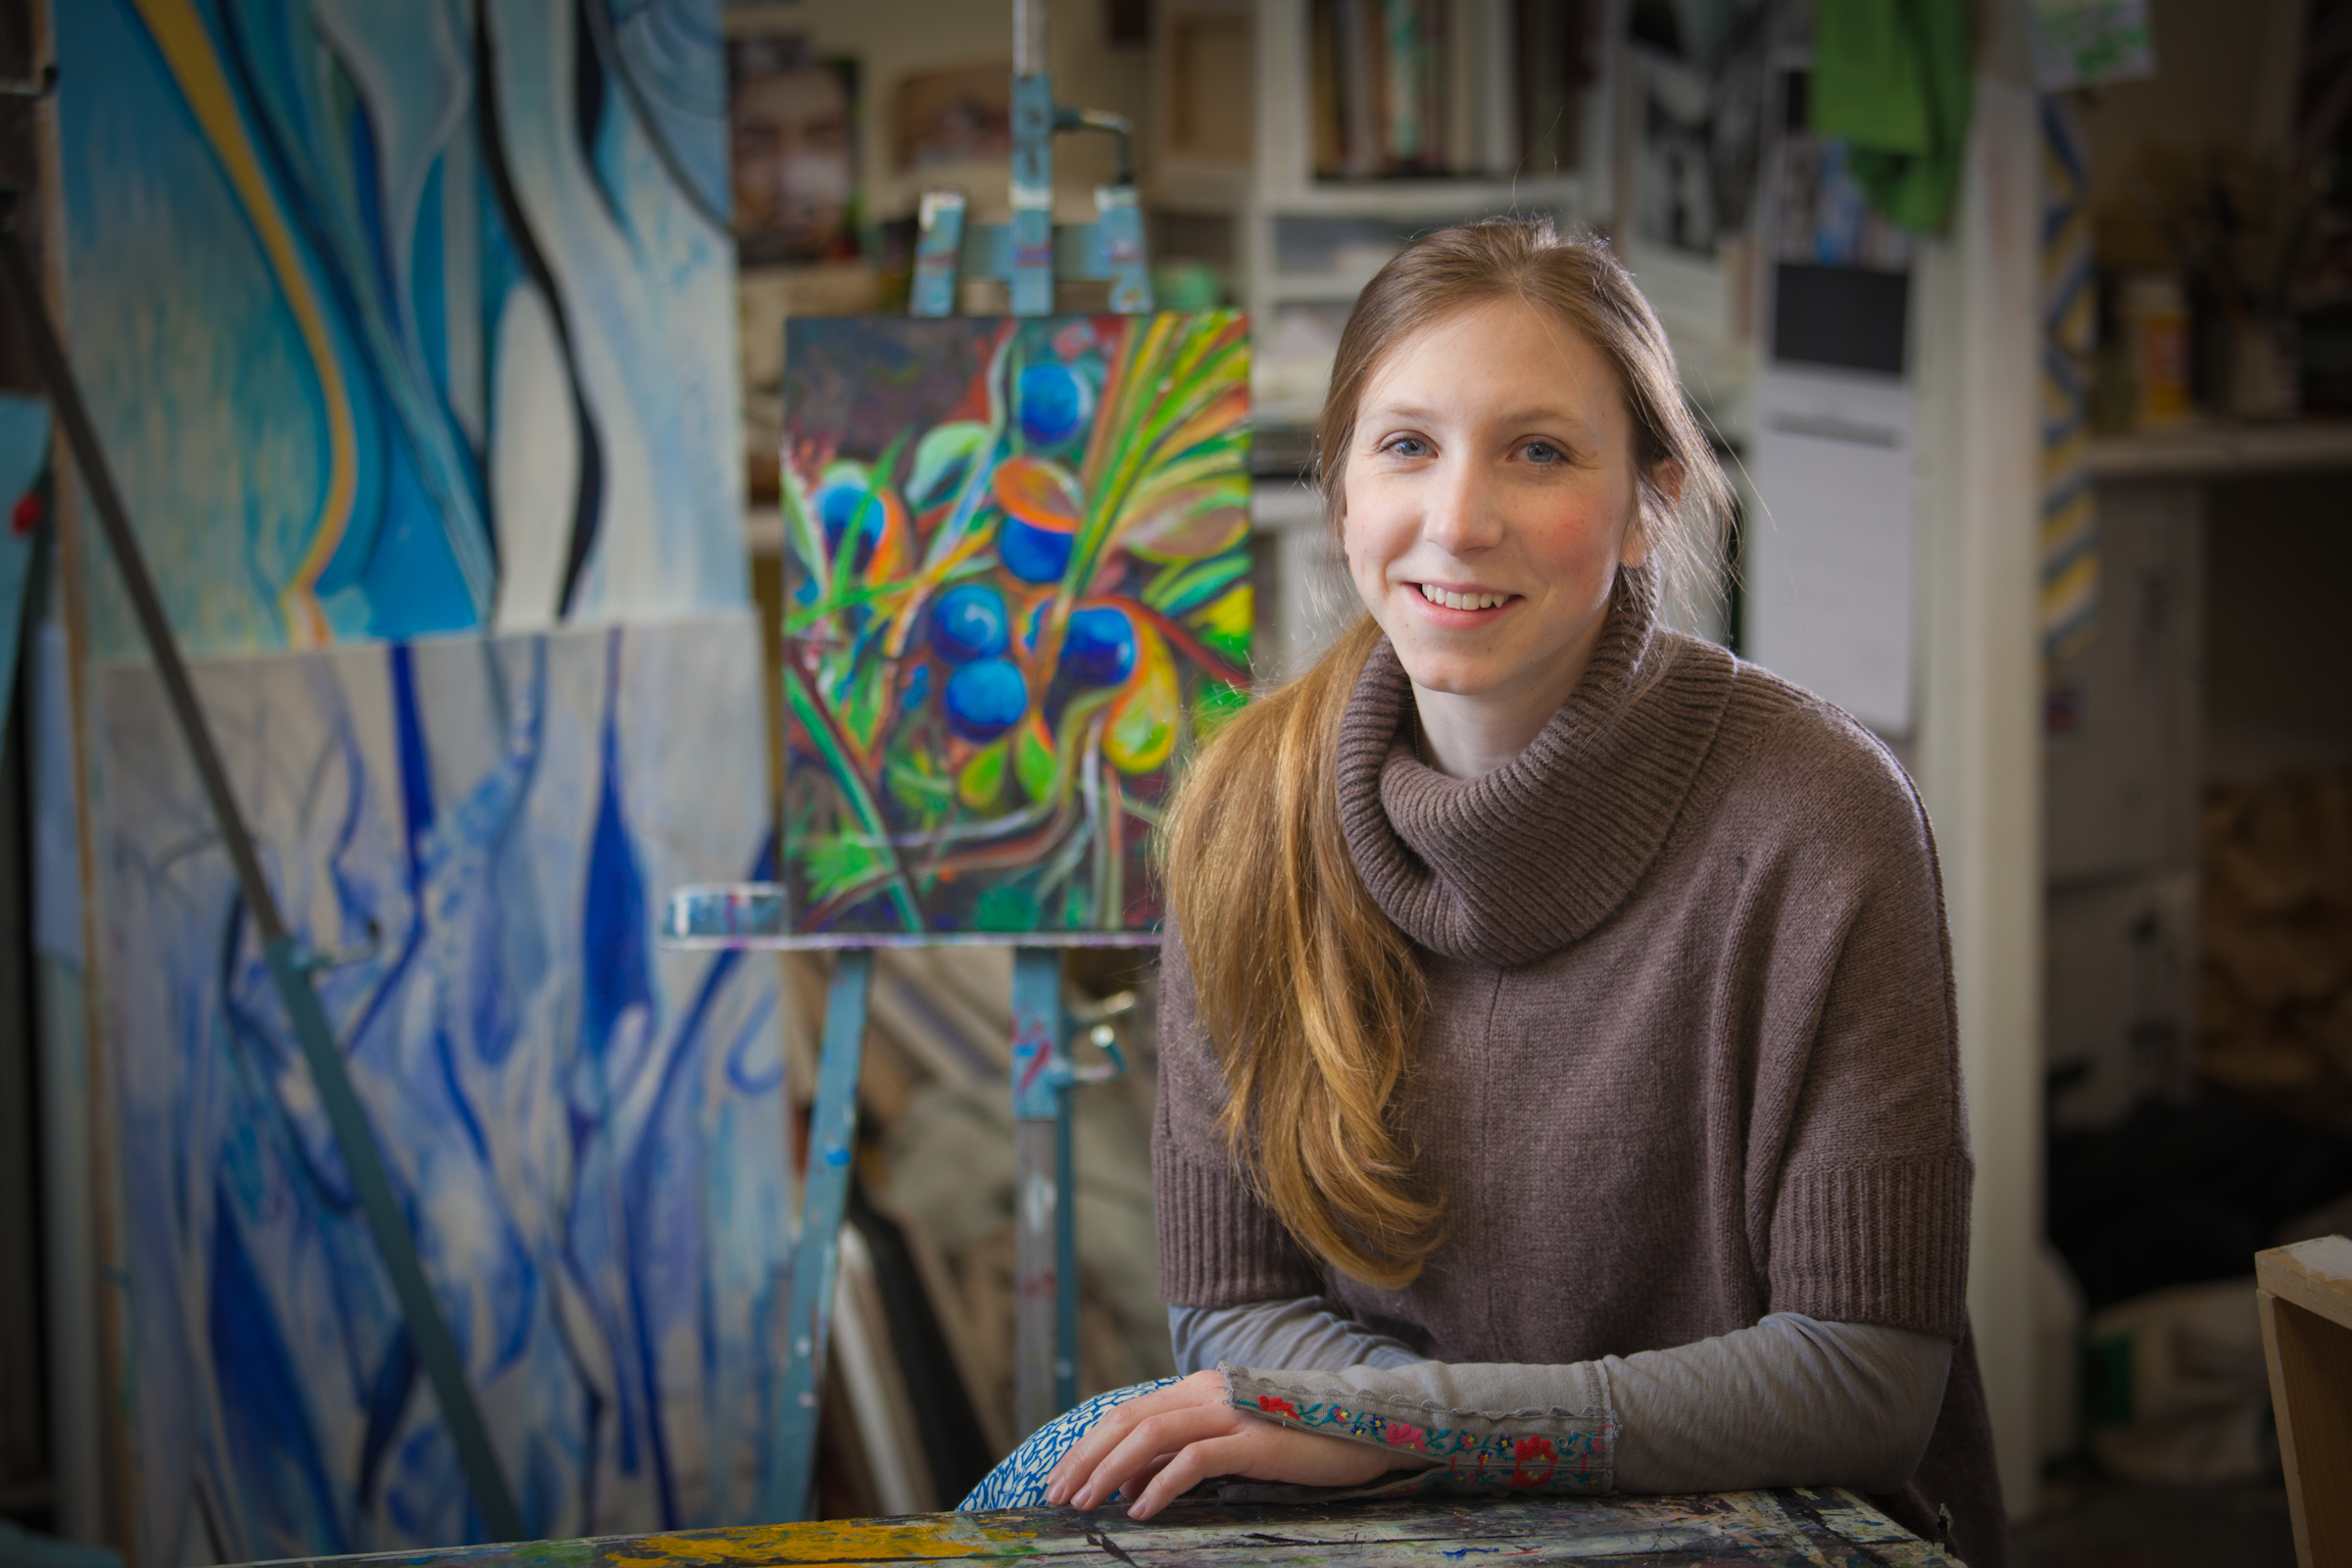 Art major Klara Maisch poses in front of one of her paintings in the Fine Arts studio. | UAF Photo by Todd Paris